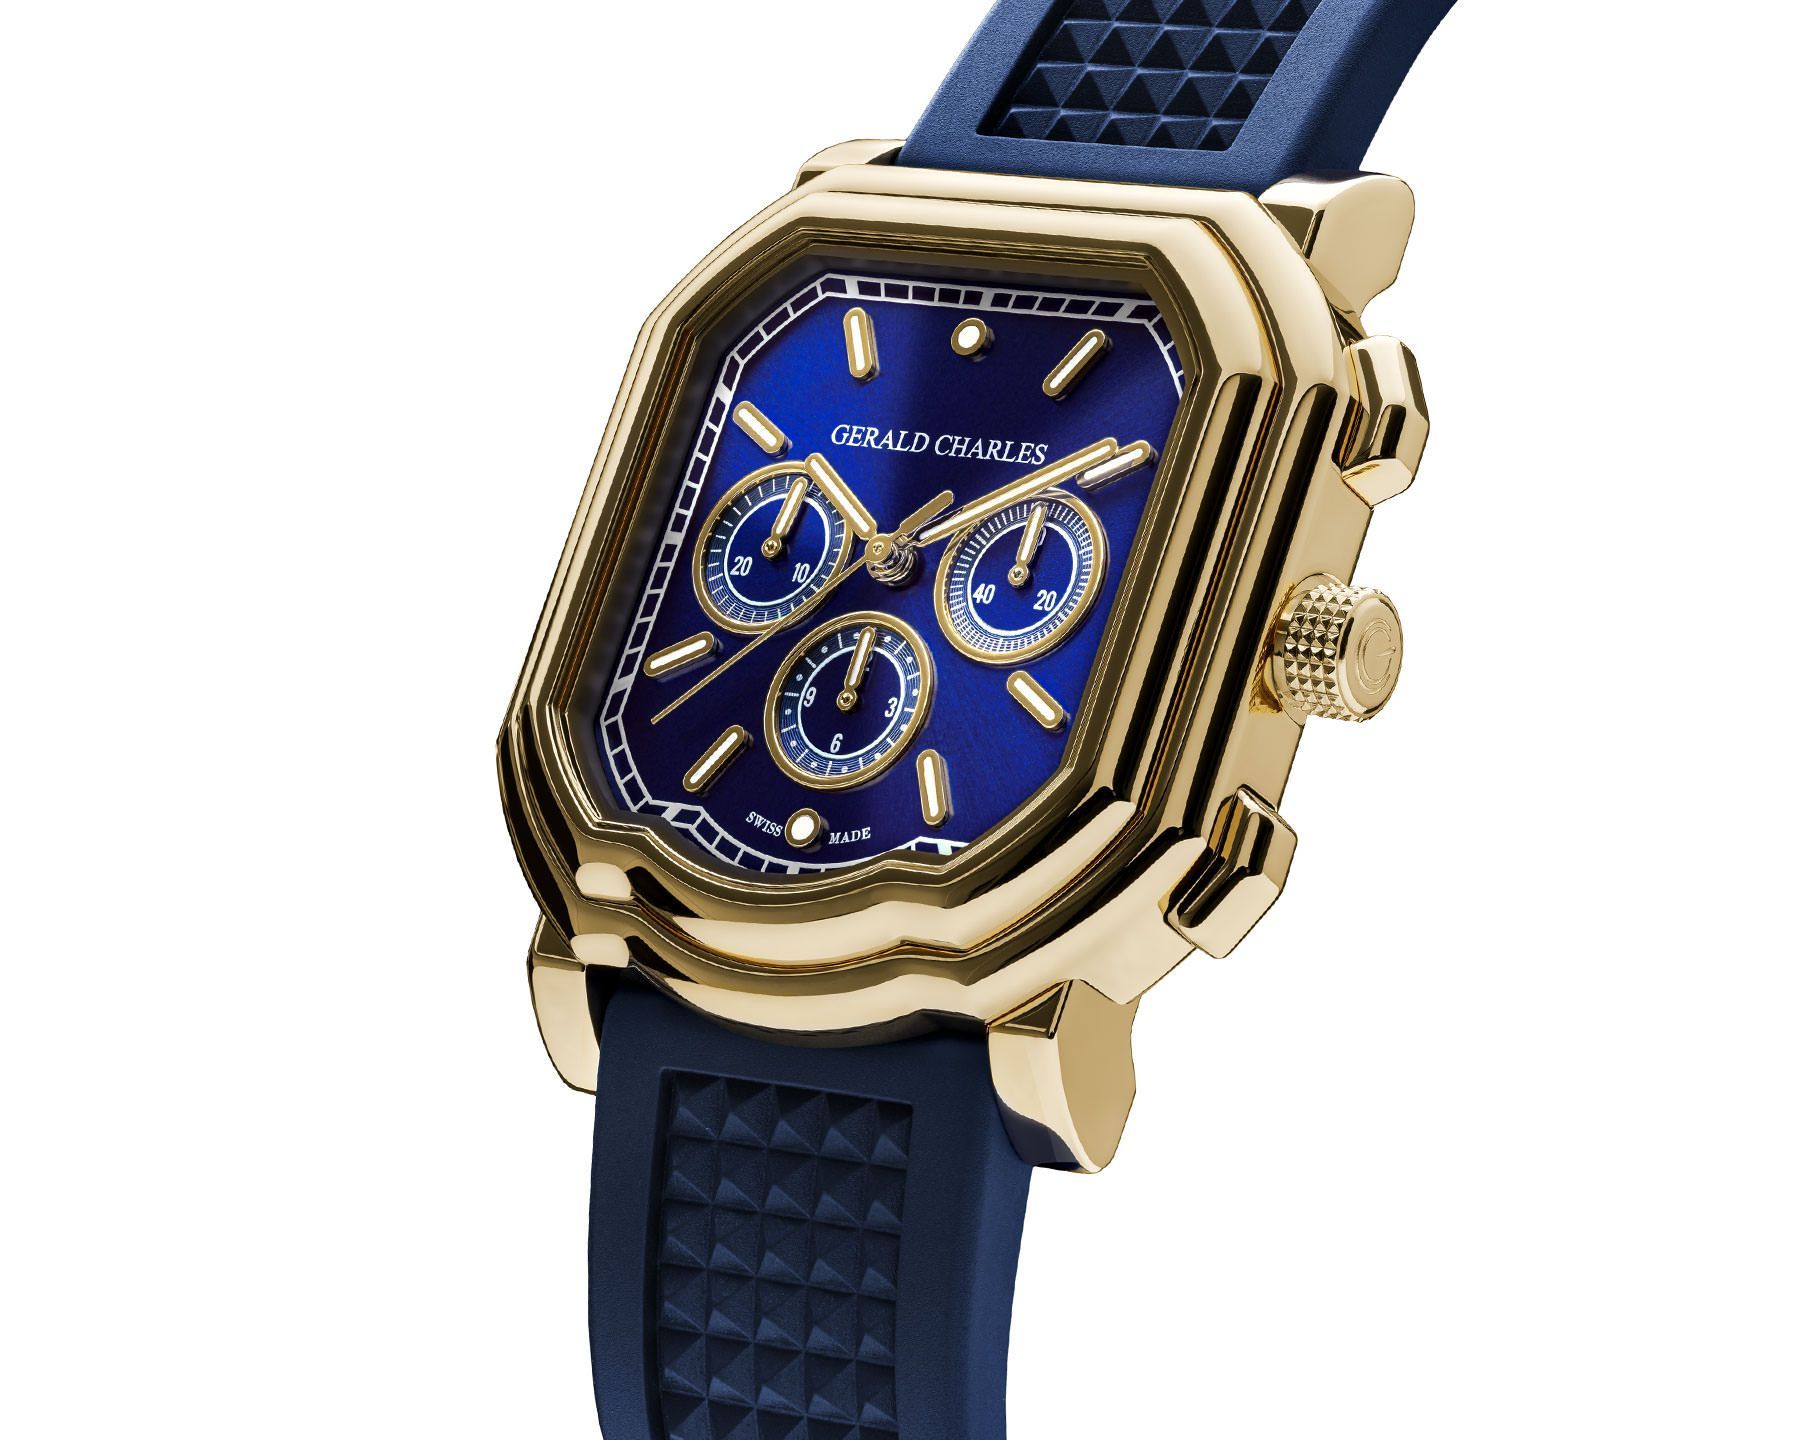 Gerald Charles Maestro Maestro 3.0 Chronograph Blue Dial 41.7 mm Automatic Watch For Unisex - 2